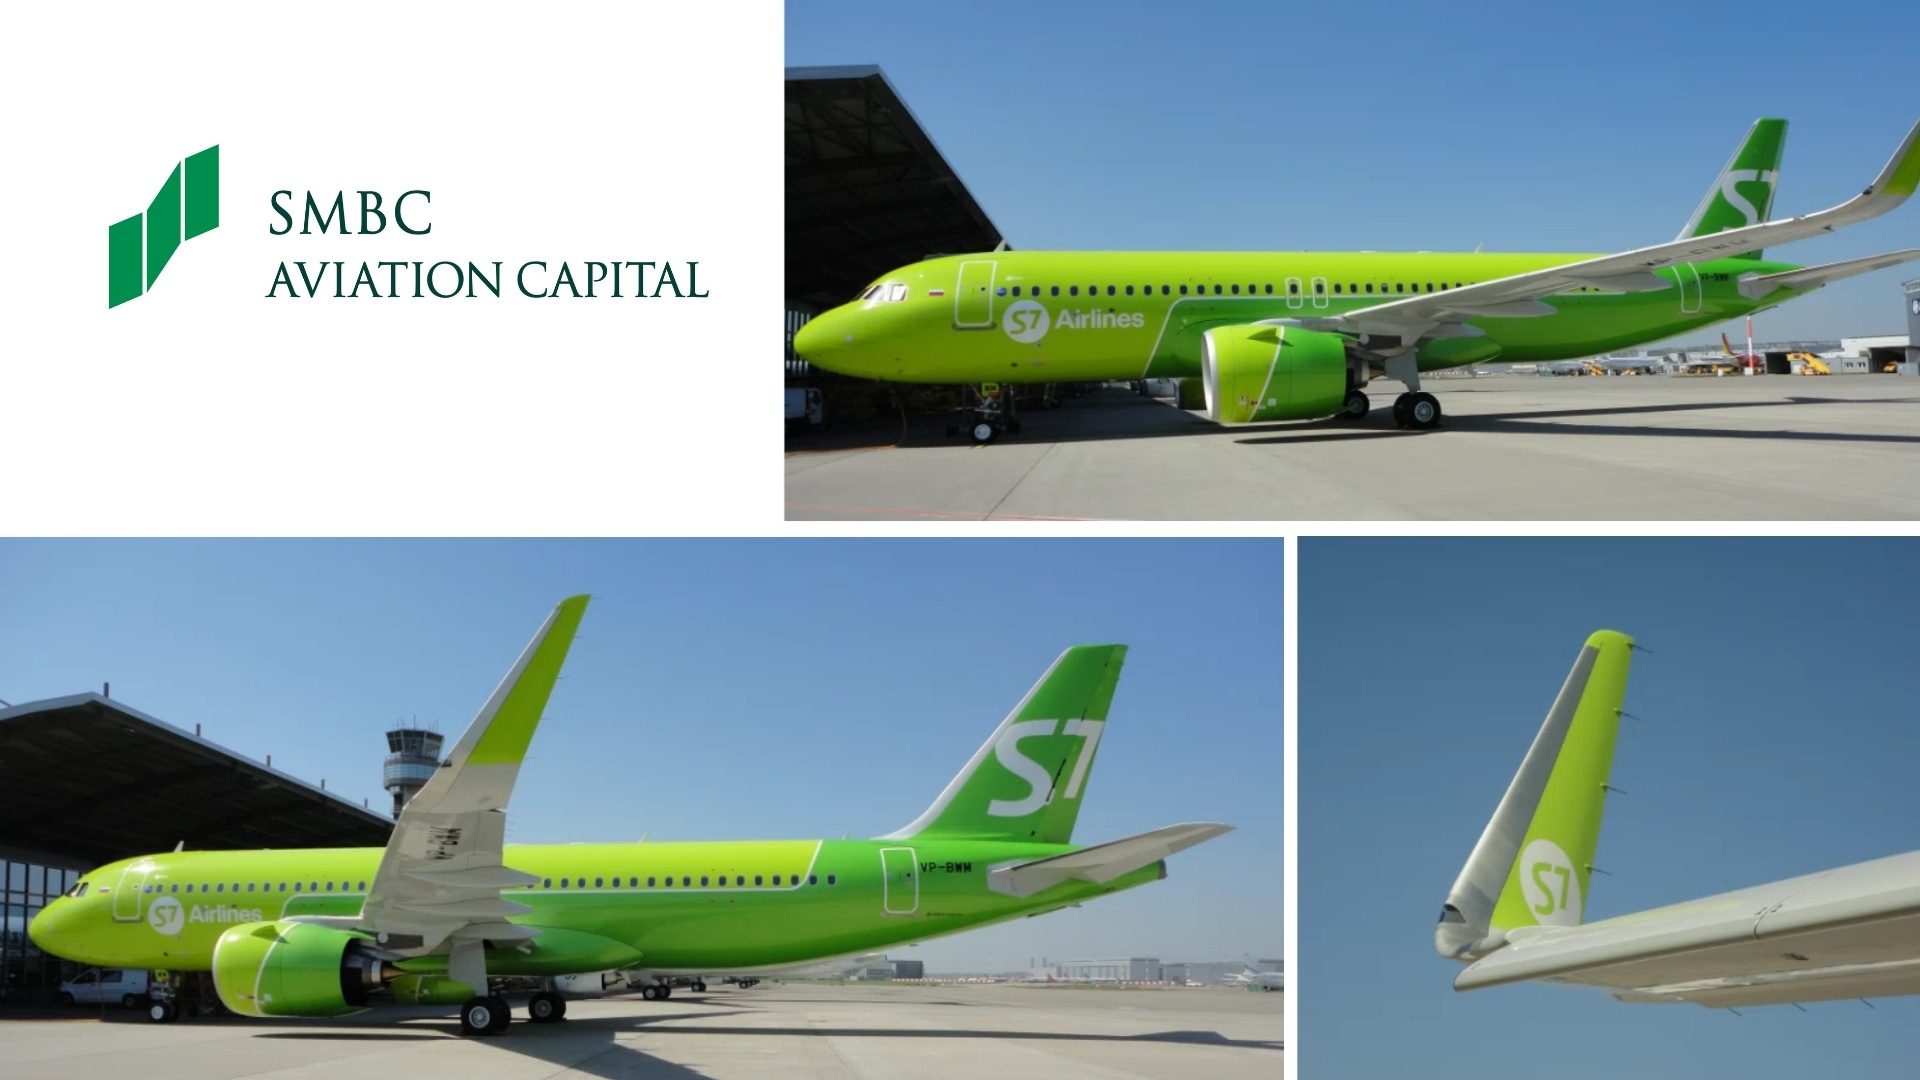 S7 Airlines takes delivery of one A320neo from SMBC Aviation Capital